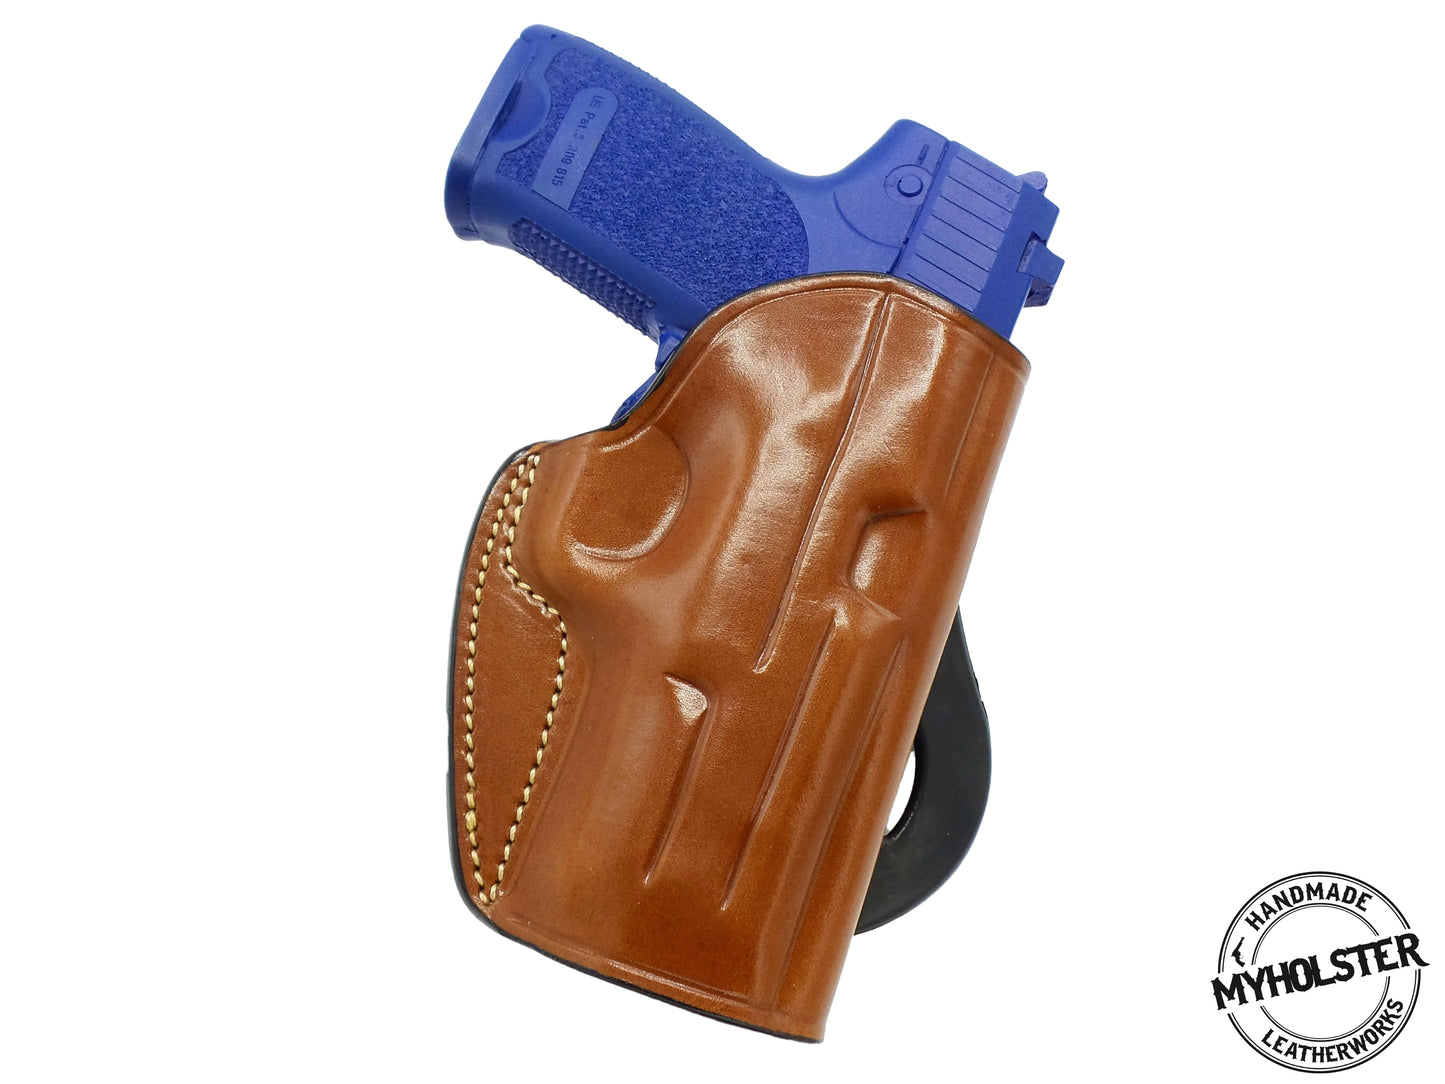 Beretta Px4 .45 ACP OWB Leather Quick Draw Right Hand Paddle Holster - Choose Your Color